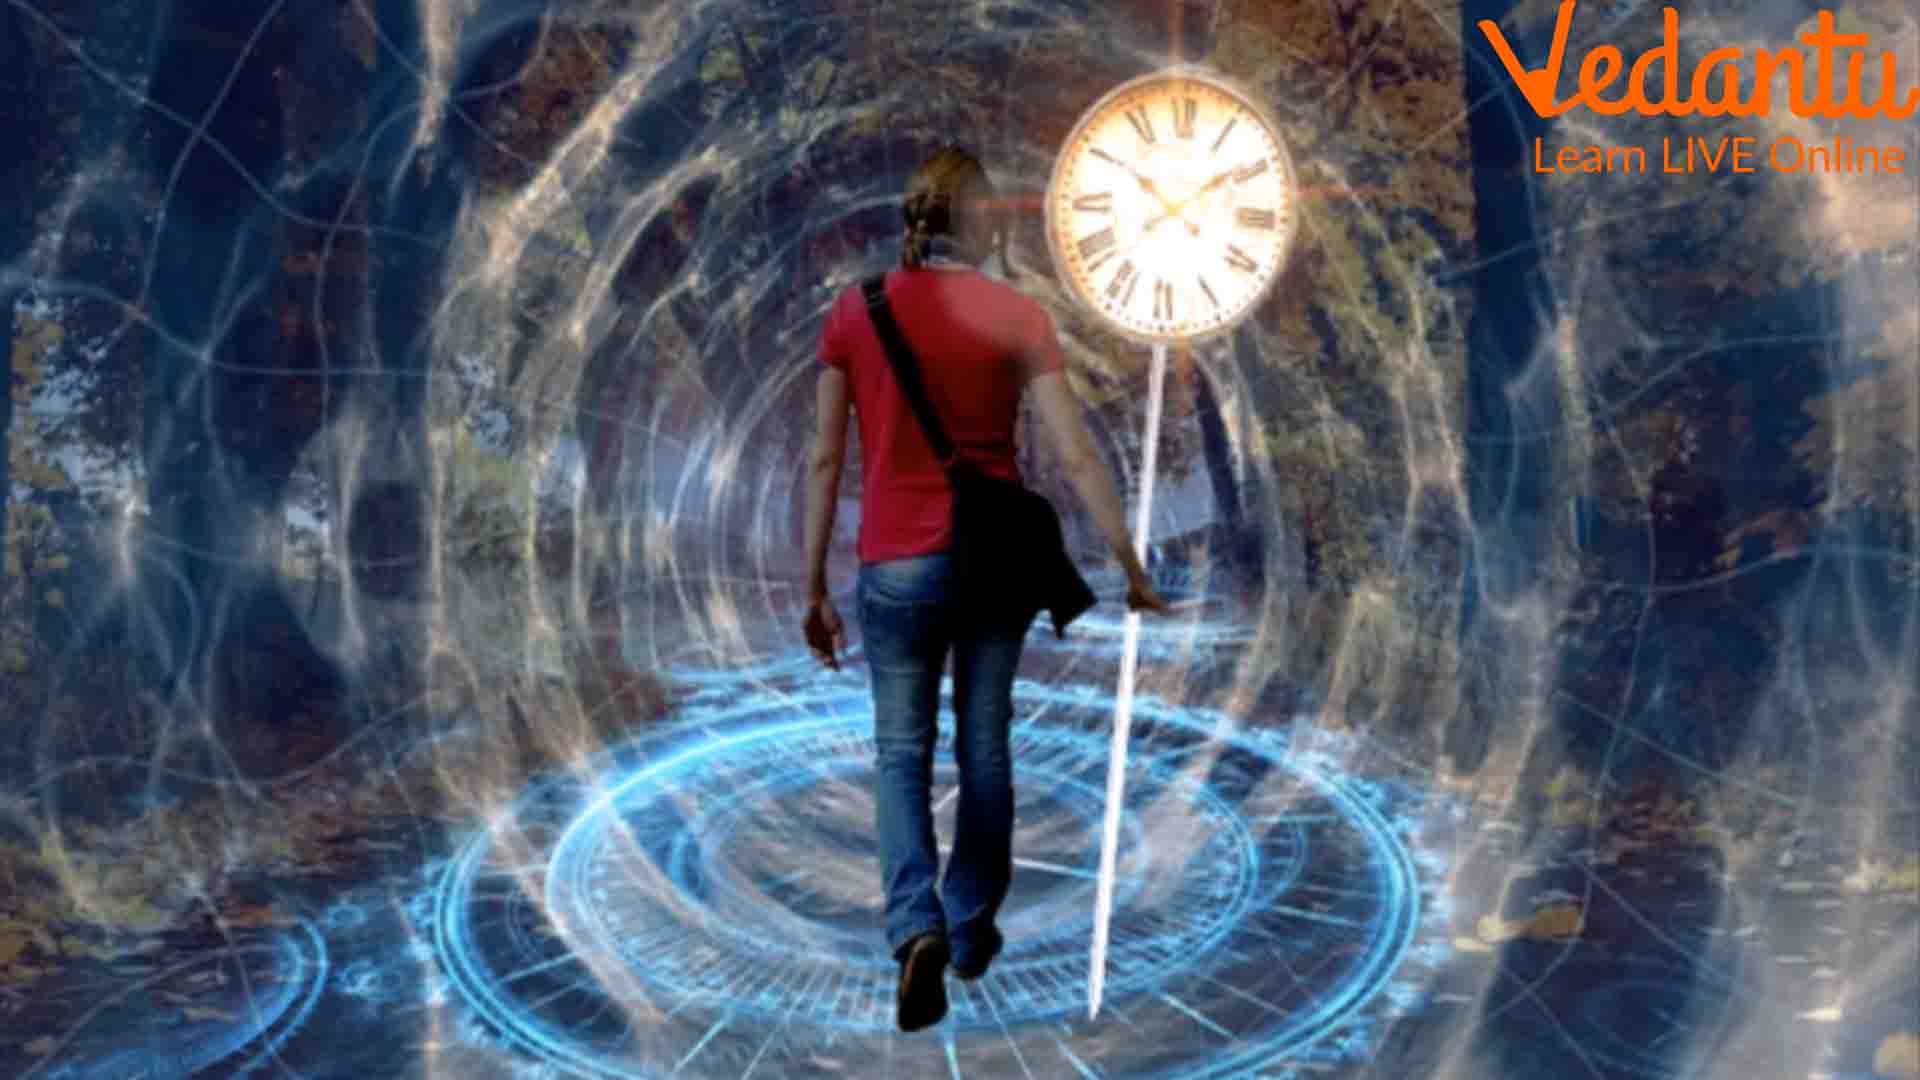 is time travel going to be possible